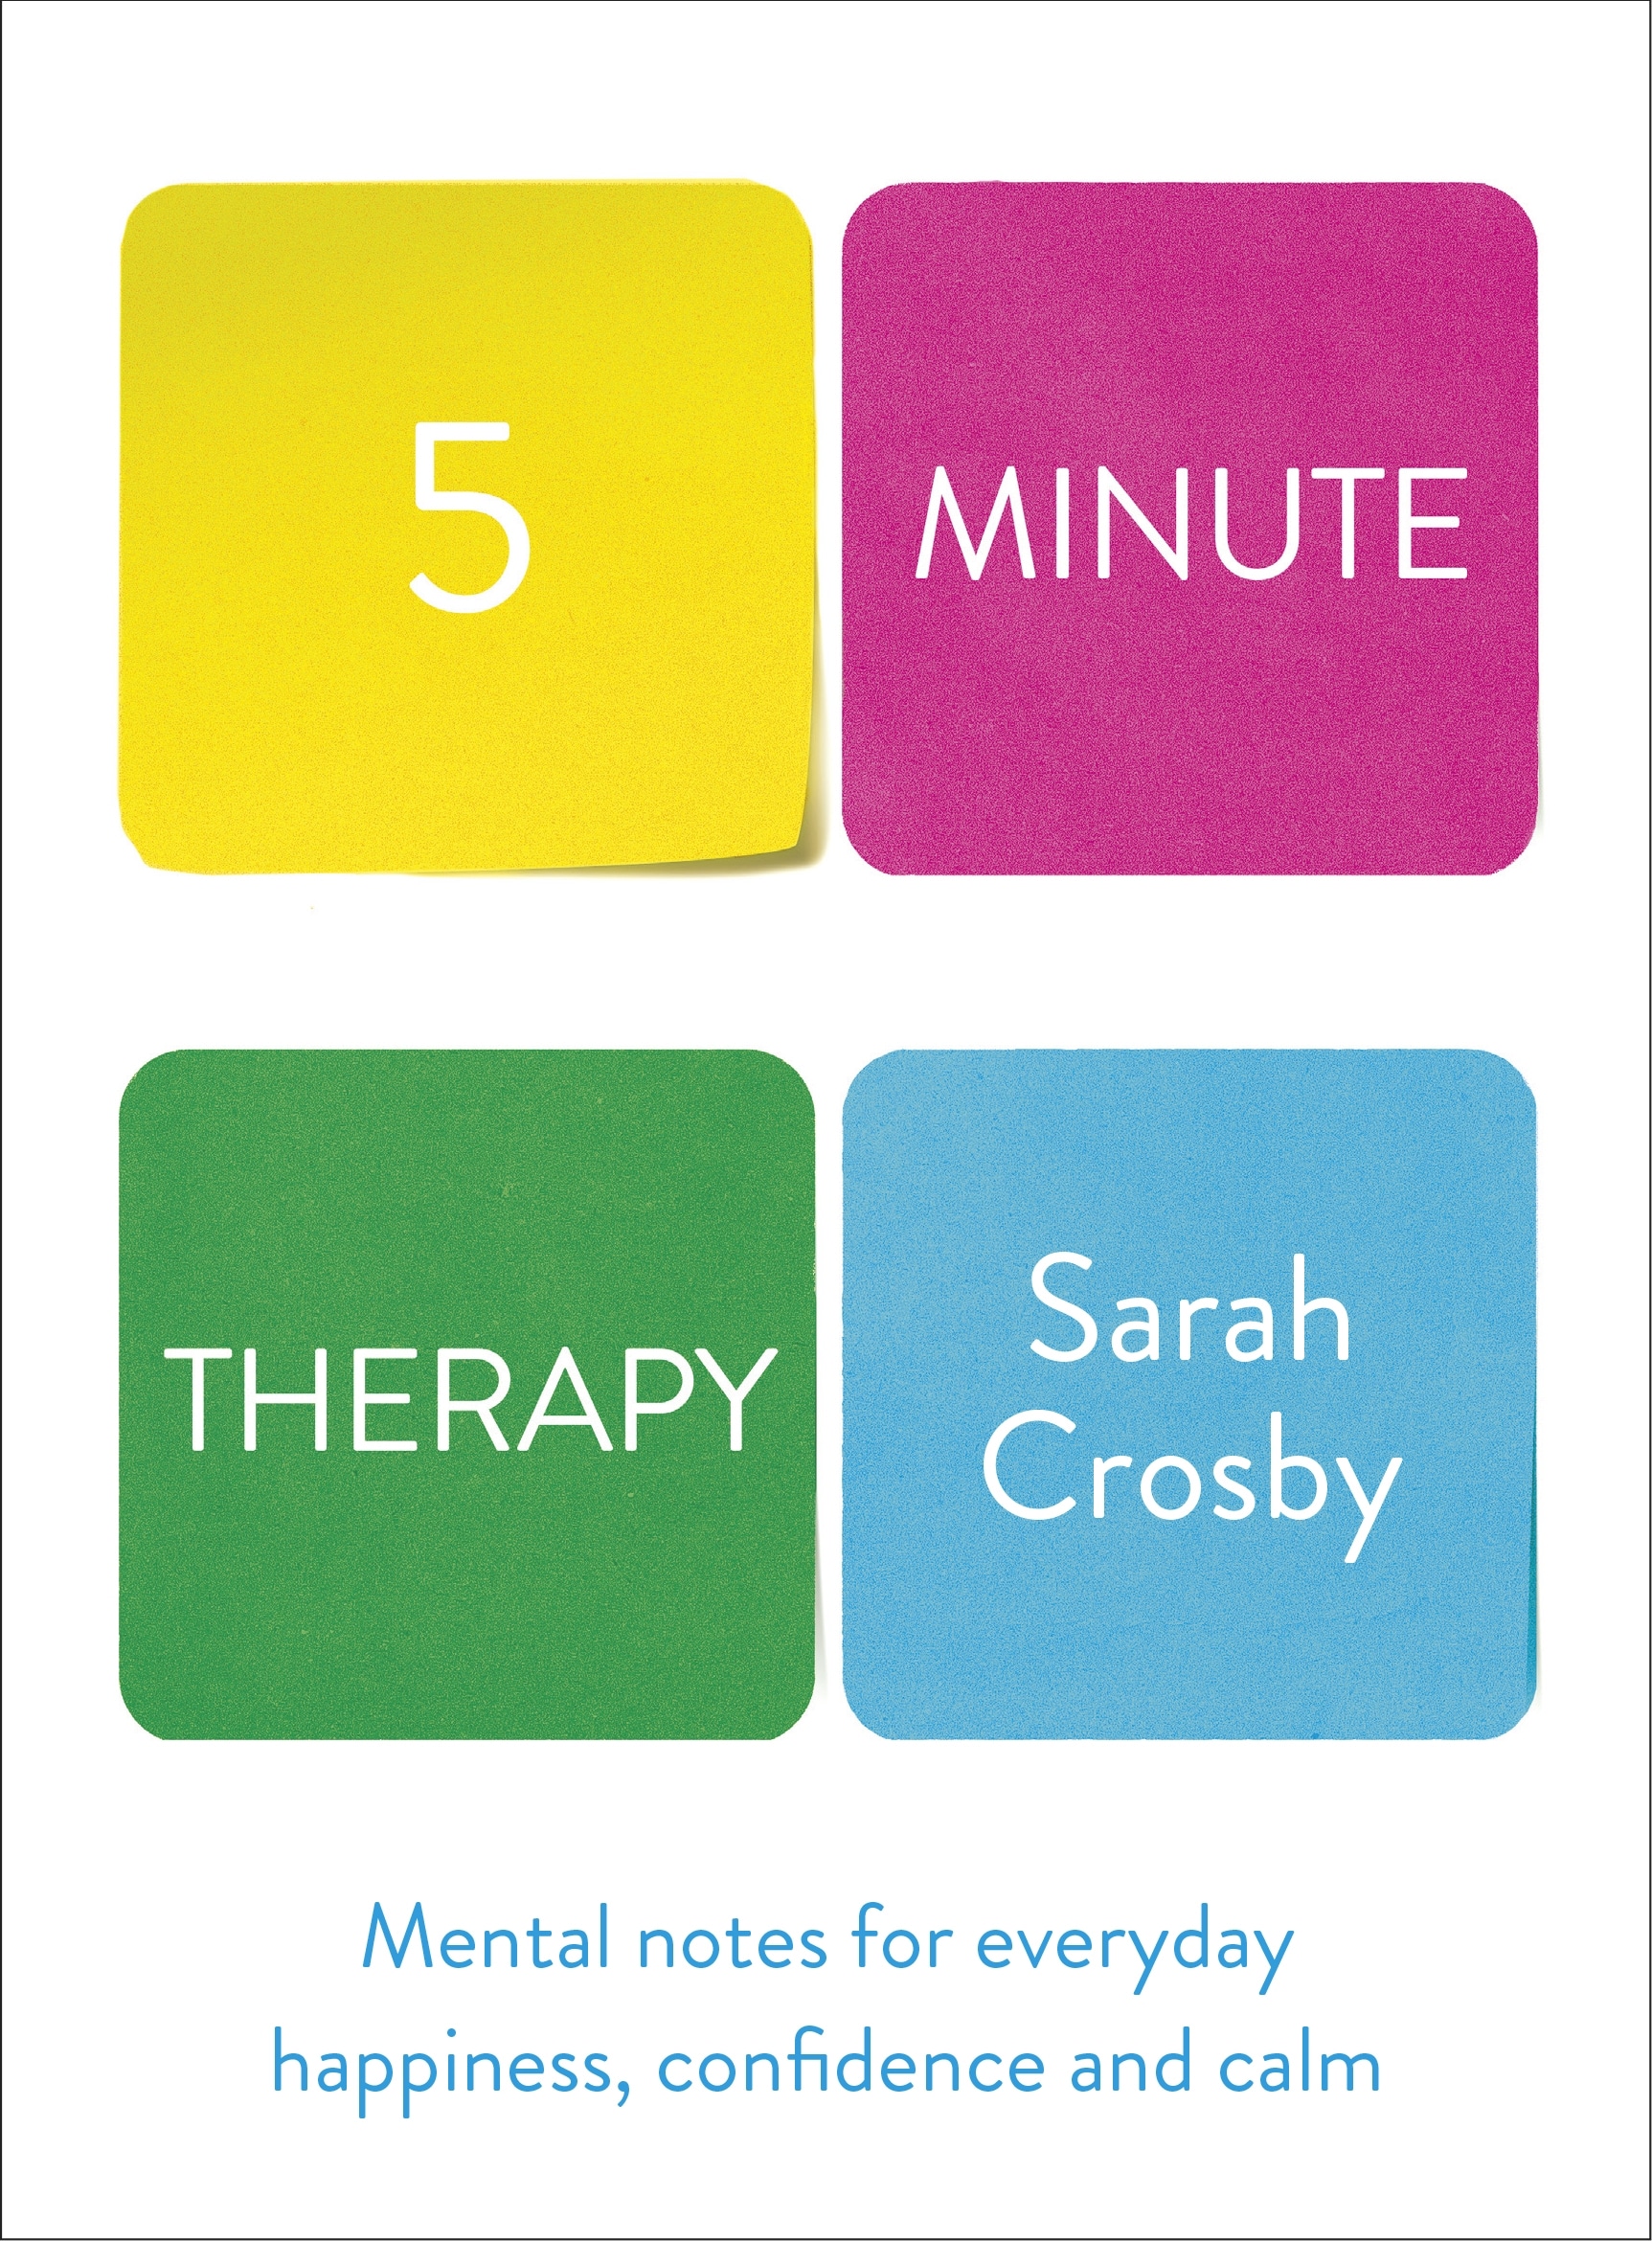 Book “Five Minute Therapy” by Sarah Crosby — December 31, 2020